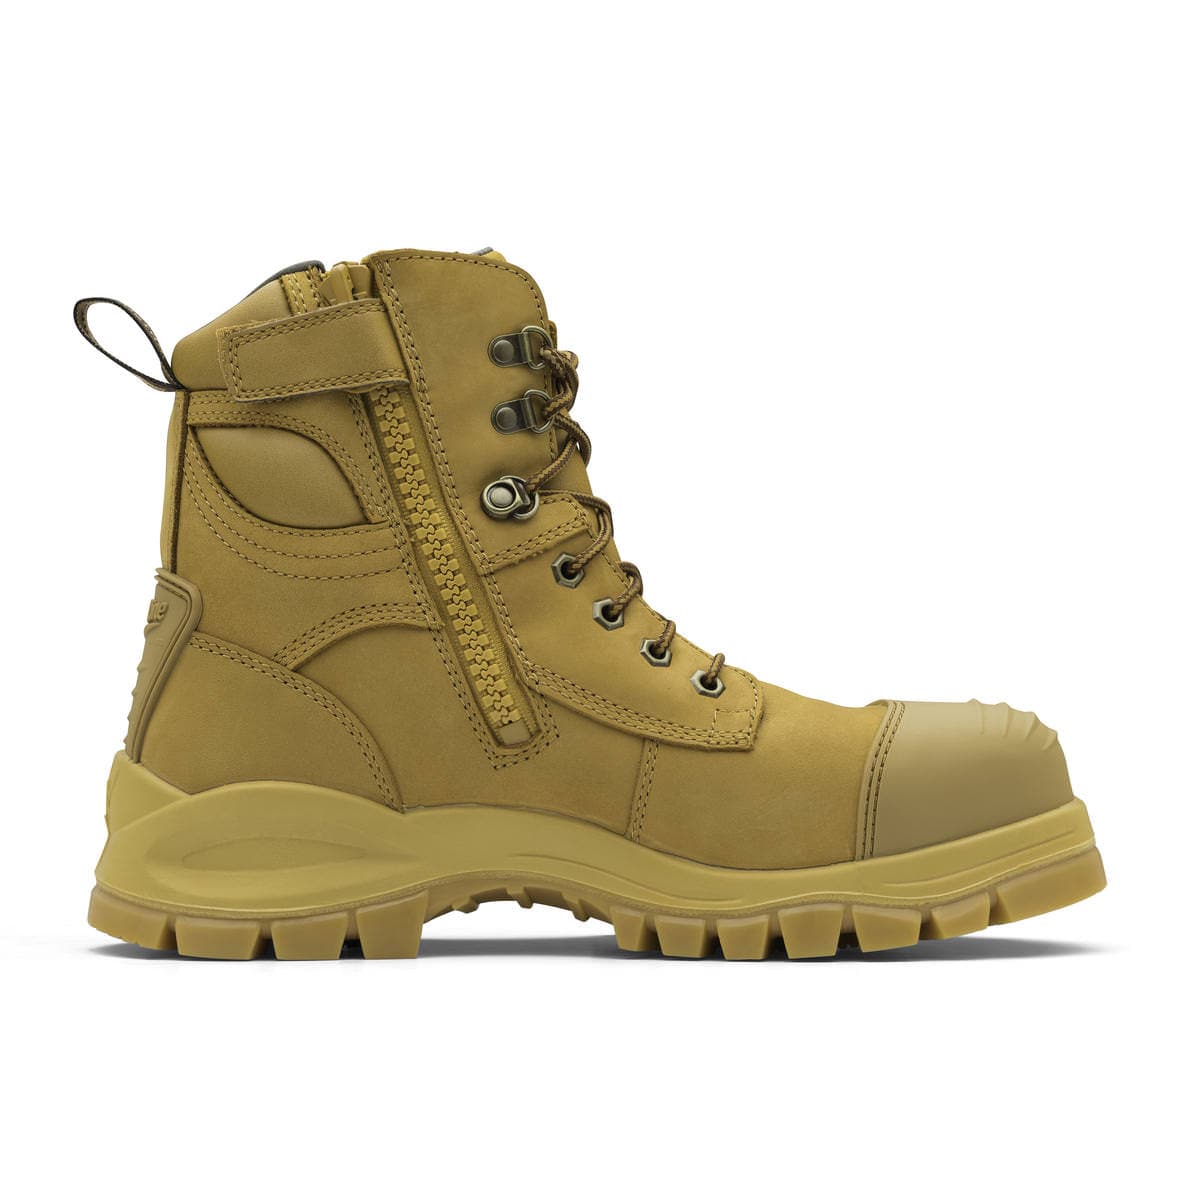 Blundstone Unisex Zip Up Series Safety Boots - Wheat #992